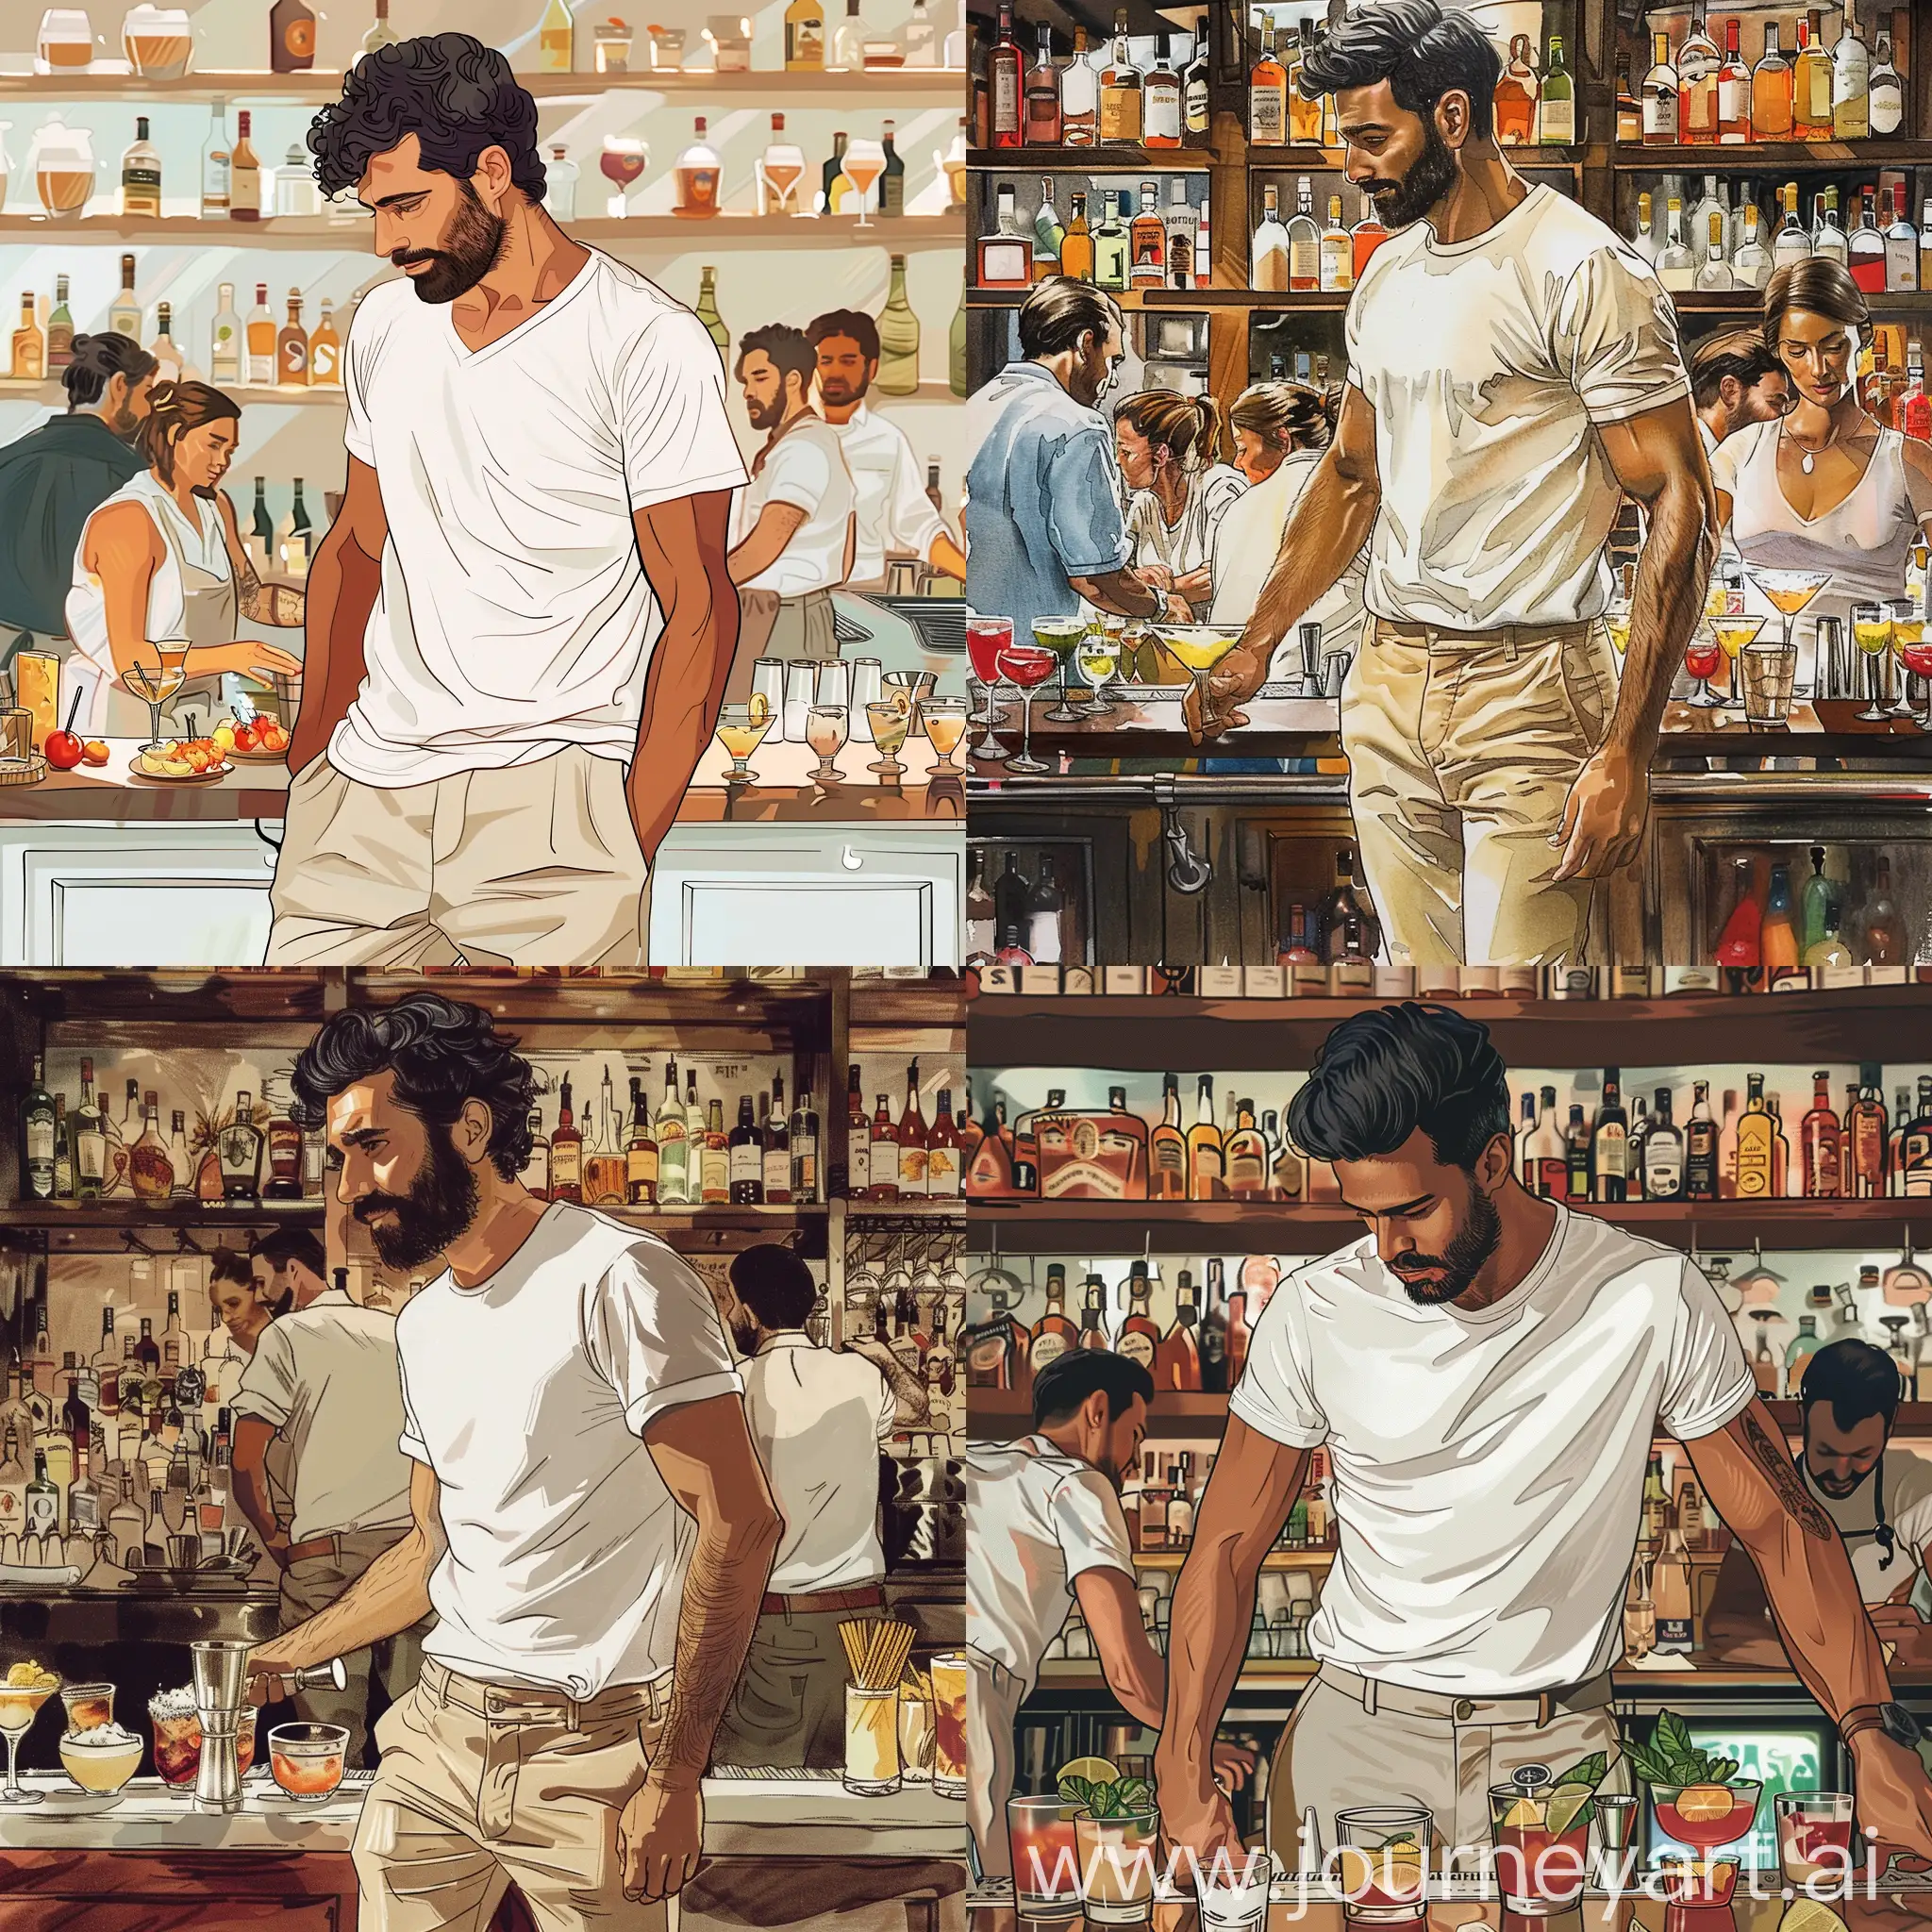 Bartender-Amir-Carmo-Mixing-Cocktails-in-Busy-Bar-Scene